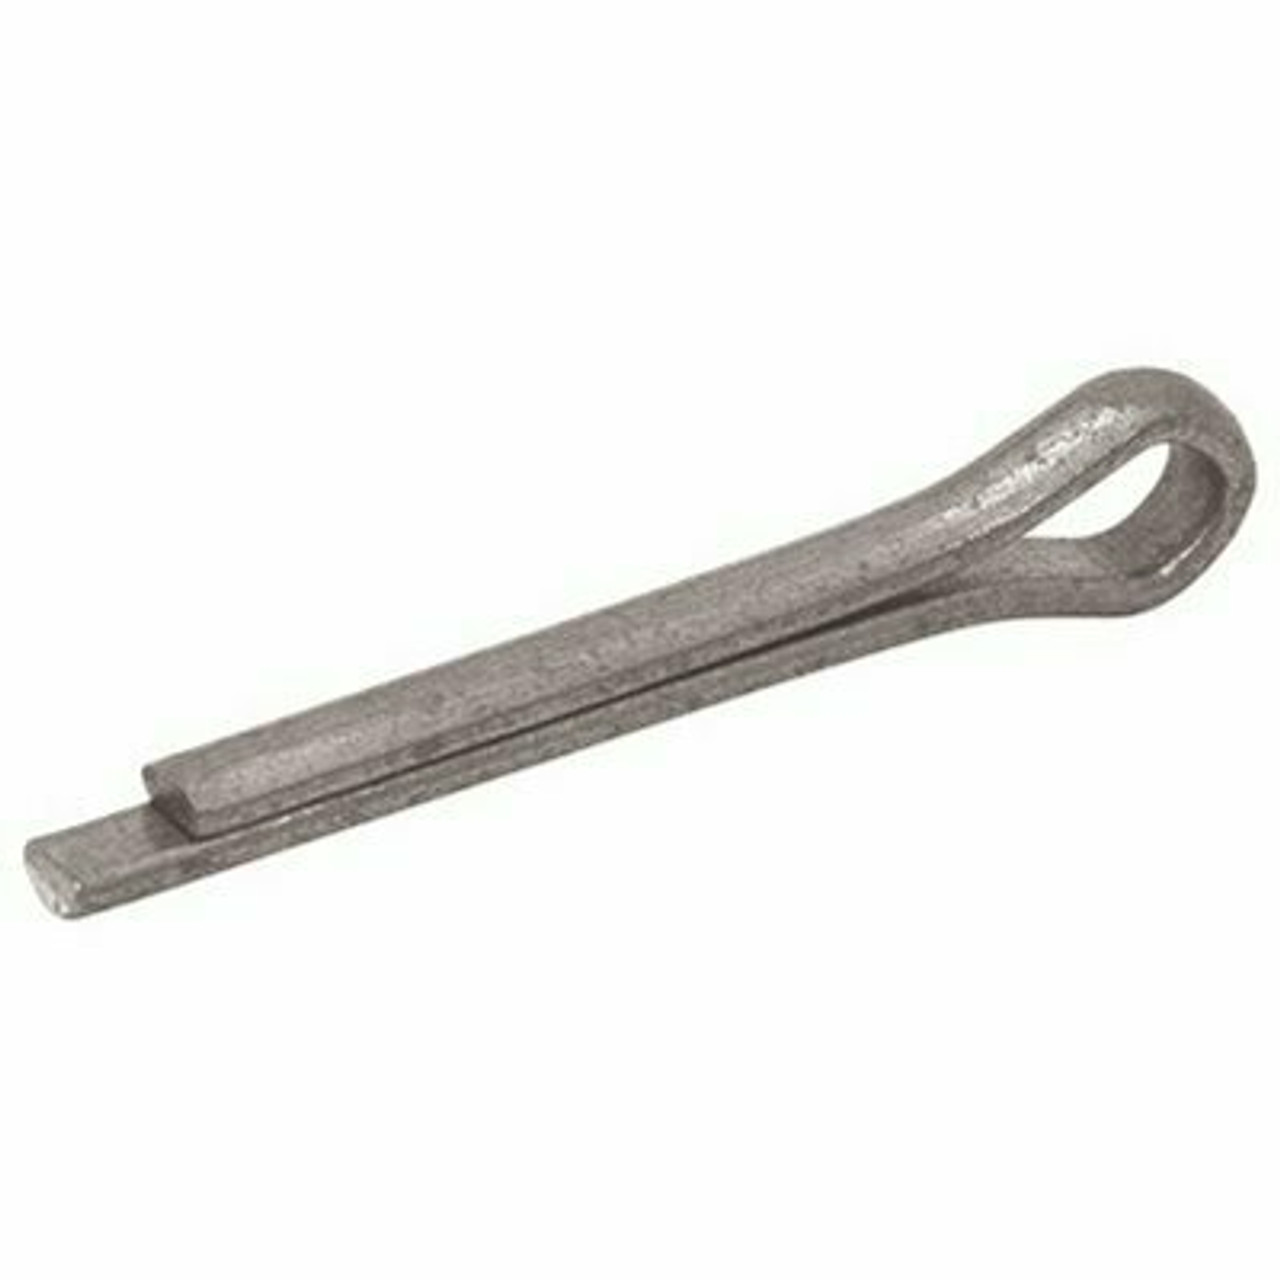 Replacement Cotter Pin For Drain Linkage Assemblies